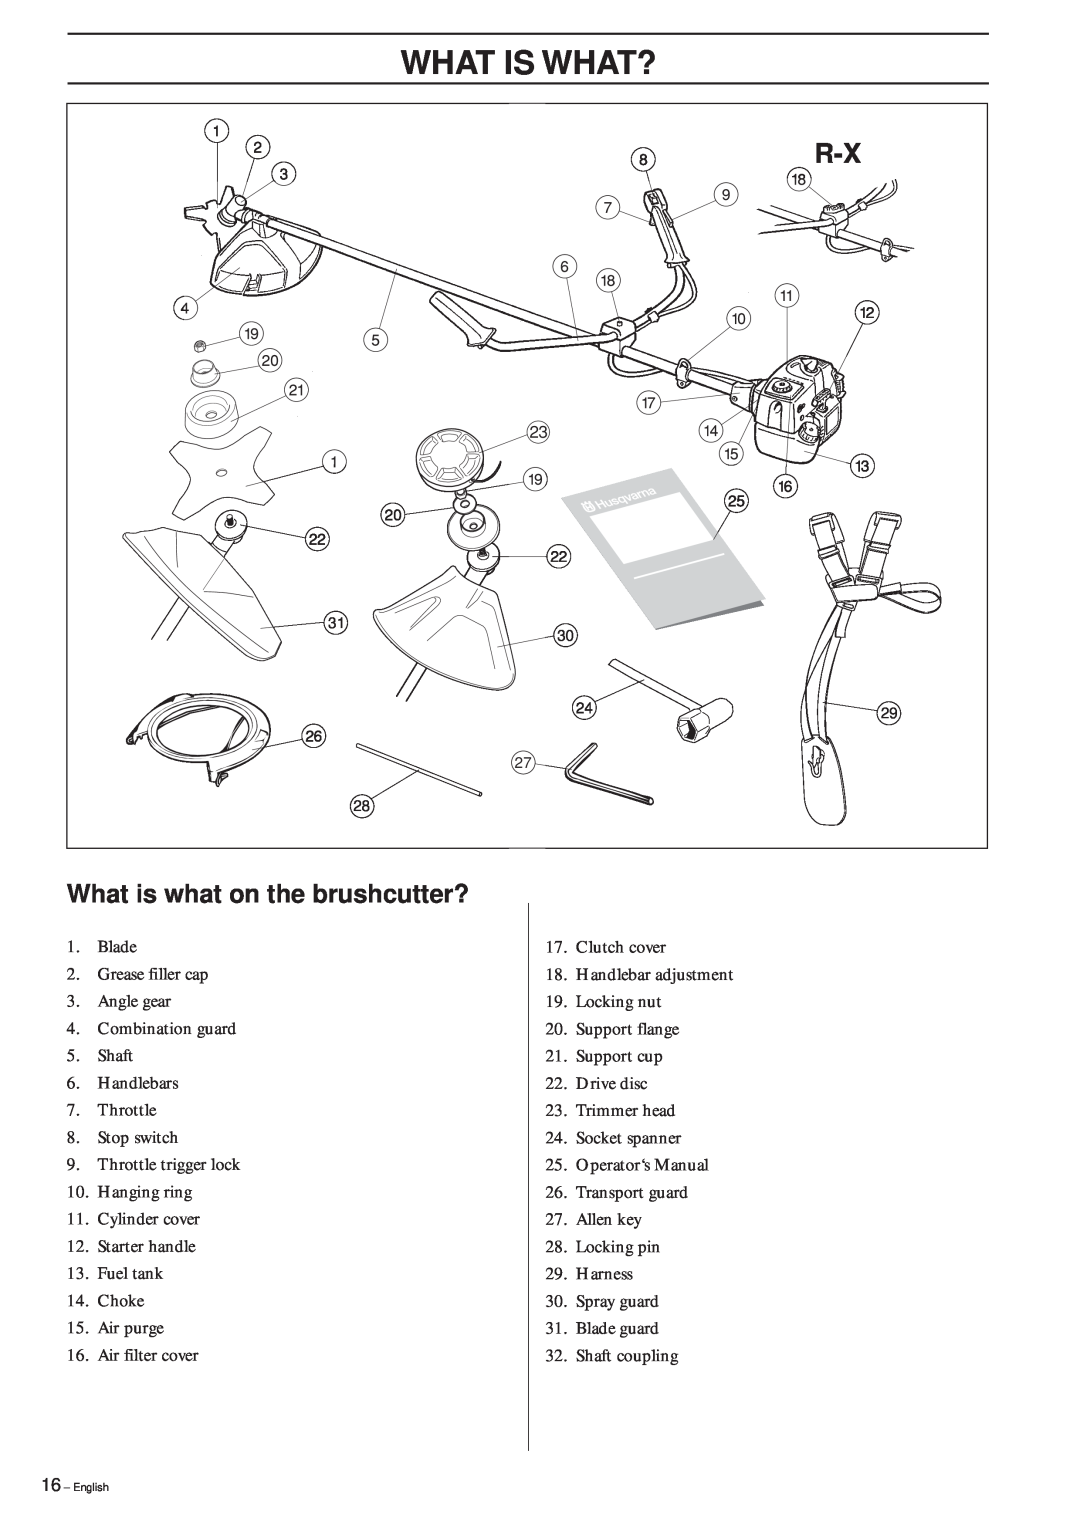 Husqvarna 322R manual What Is What?, What is what on the brushcutter? 